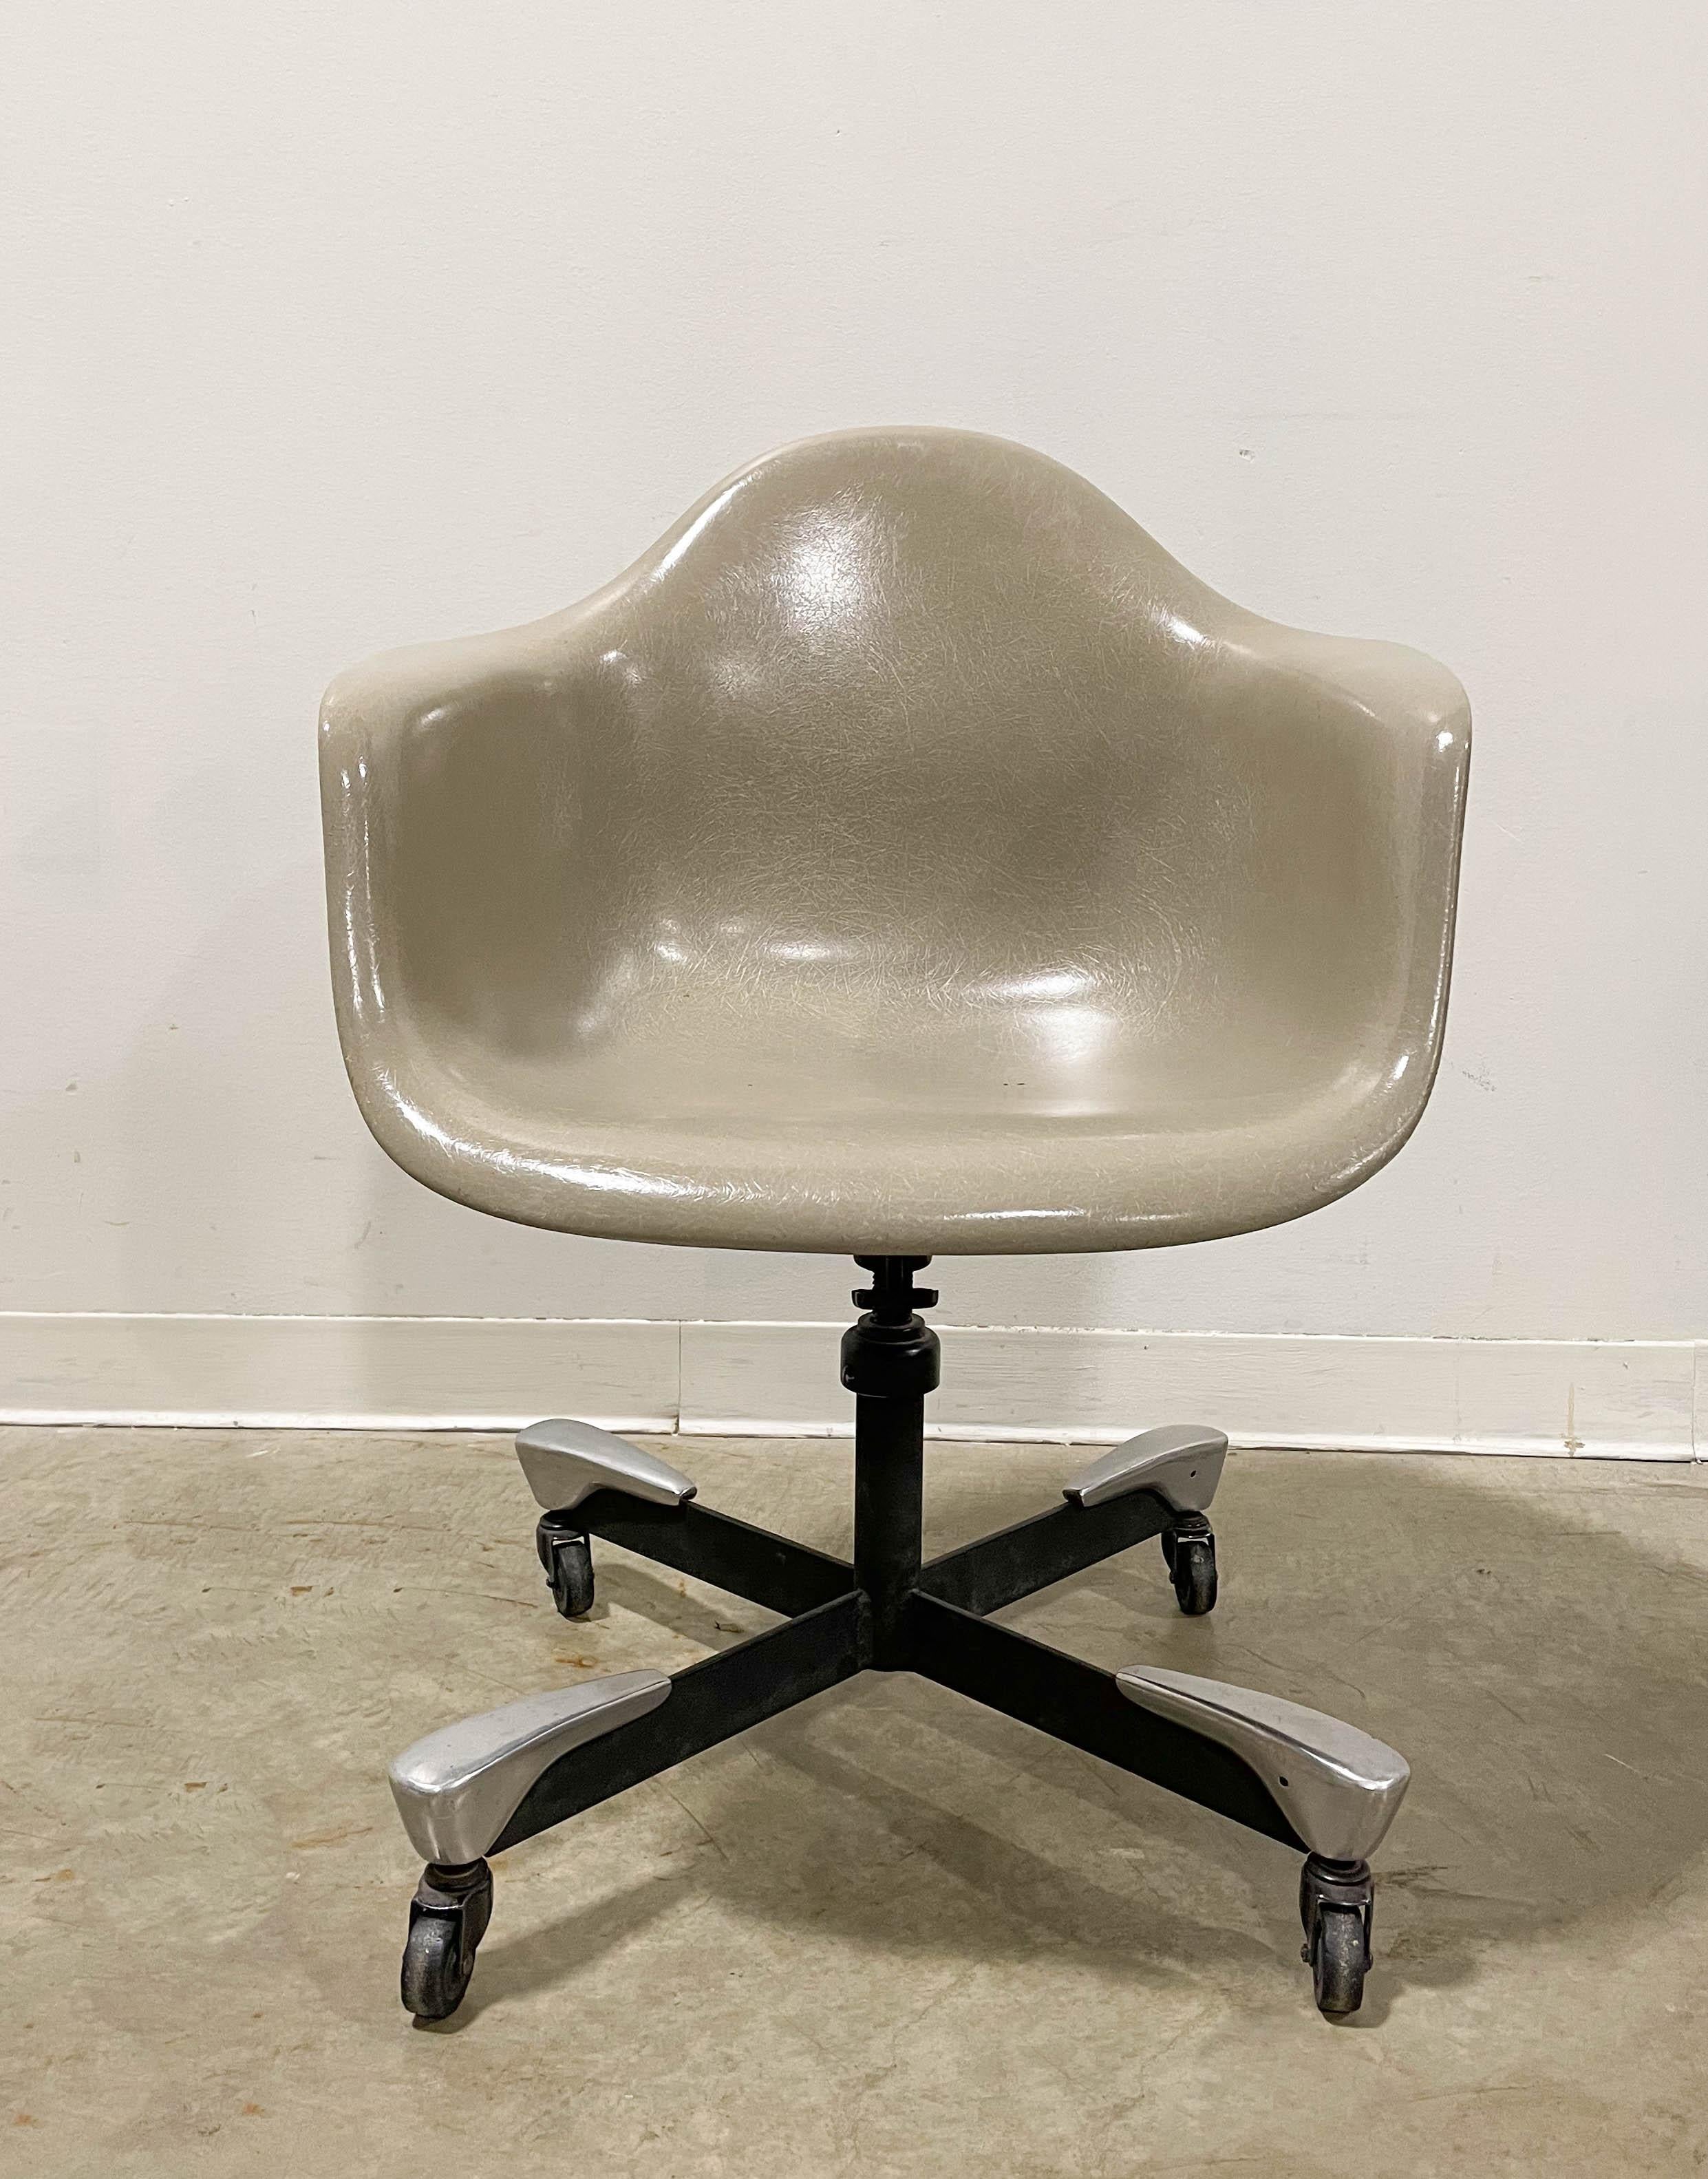 This is an uncommon version of the Eames DAT-1 Fiberglass Armchair from Herman Miller. This DAT-1 Fiberglass Armchair is a rare first-generation version from 1957, and it still boasts the date stamp. Also special are the aluminum foot guards on the